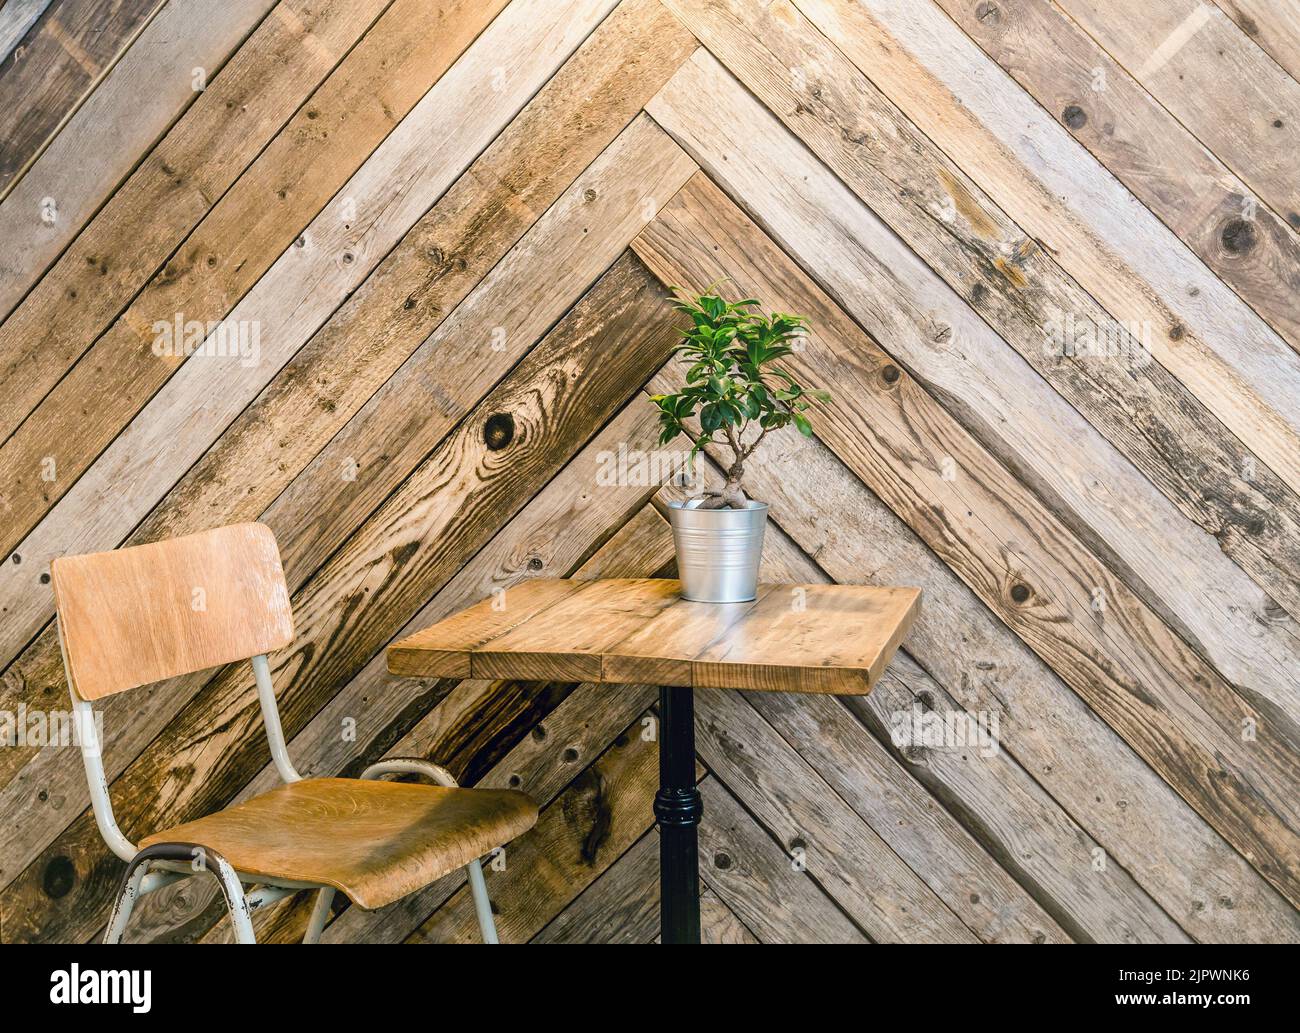 Reusing old wood boards to make herringbone or fishtail wall pattern in home room. Alternative home decor accent. Stock Photo